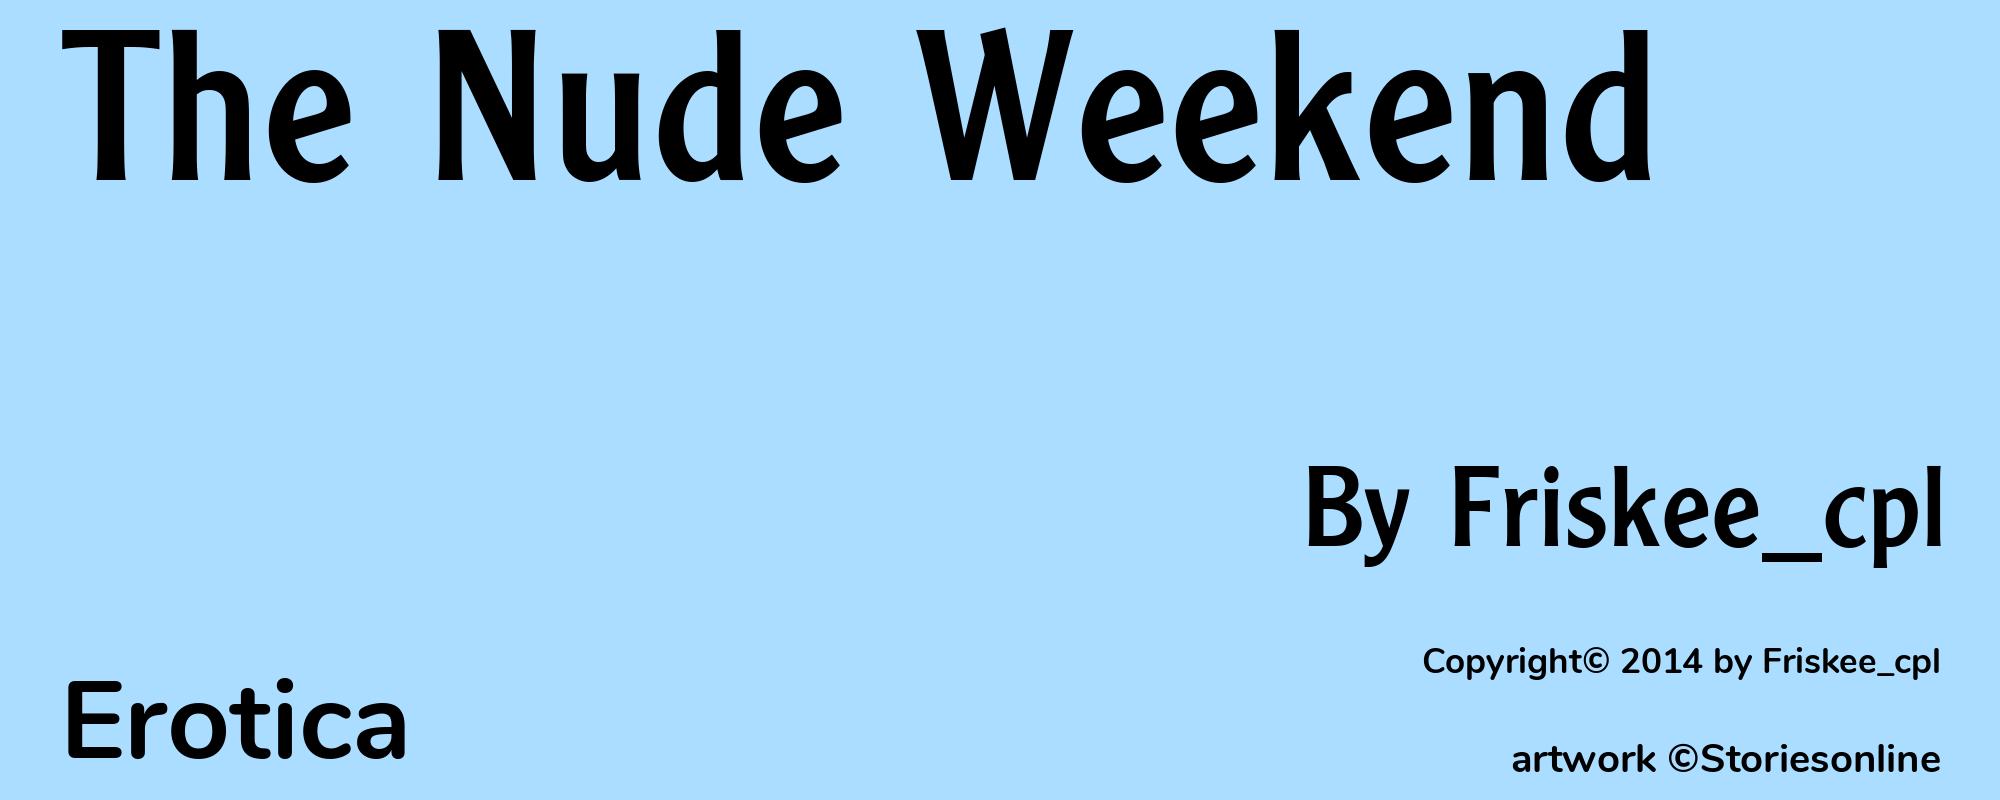 The Nude Weekend - Cover